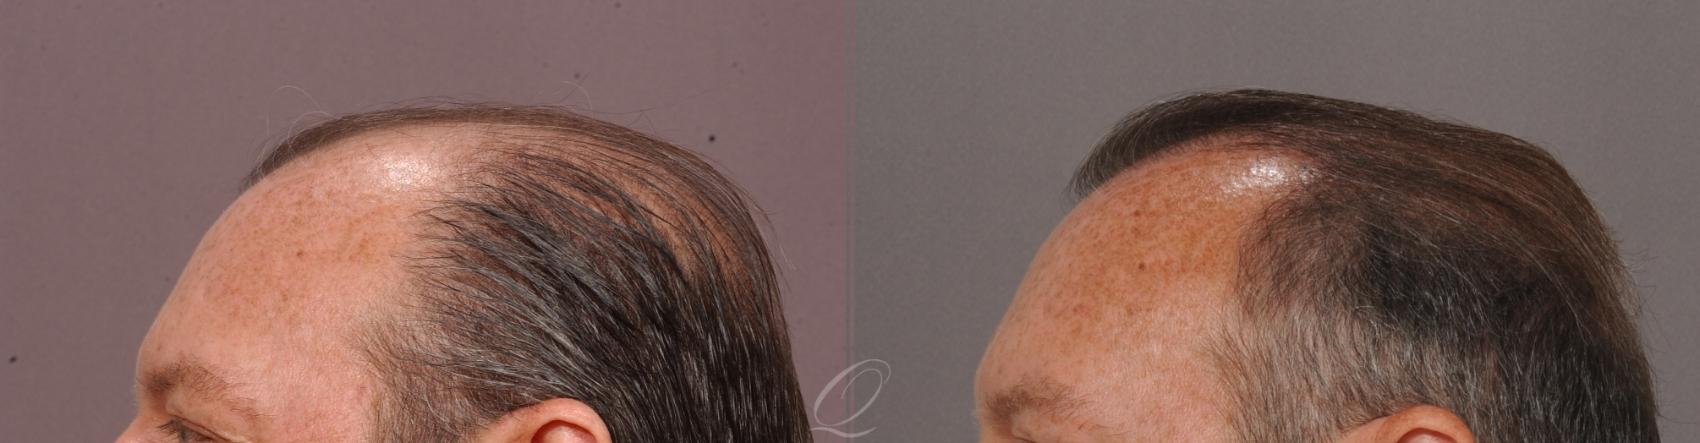 FUT Case 1001515 Before & After Left Side | Rochester, Buffalo, & Syracuse, NY | Quatela Center for Hair Restoration